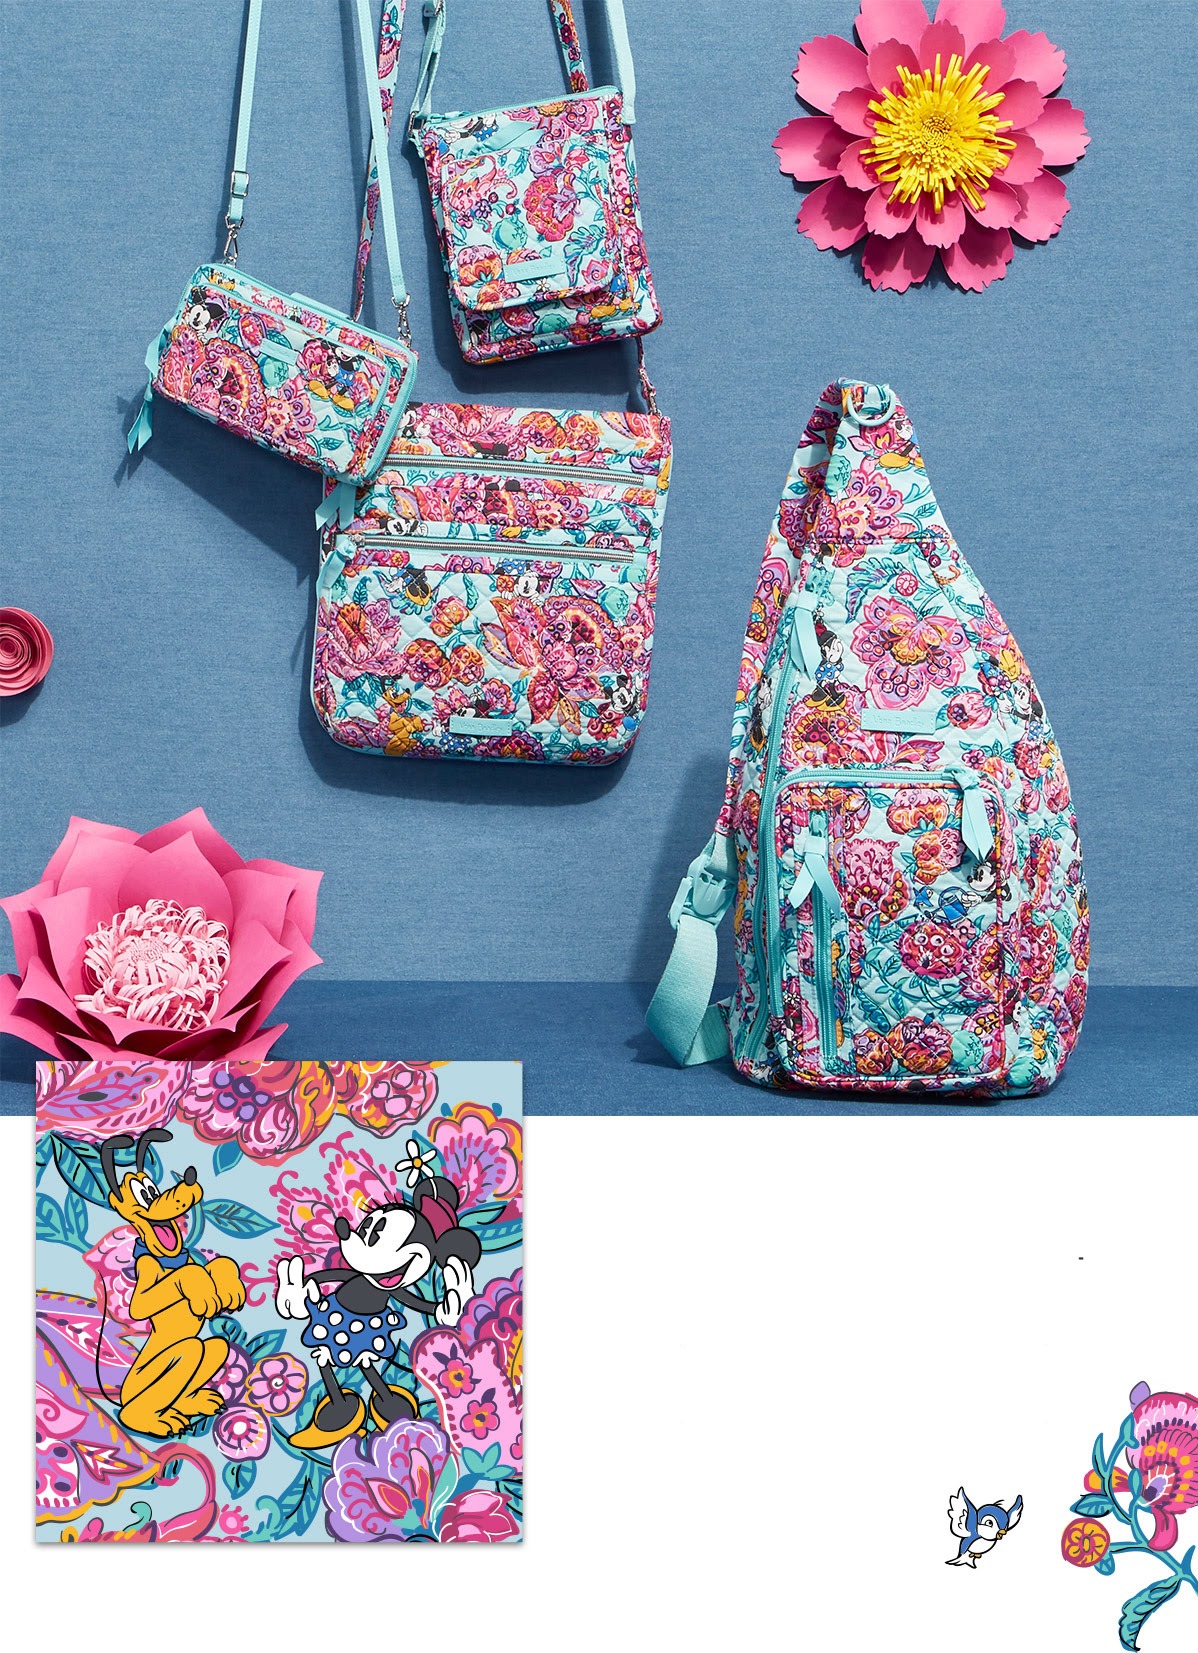 A New Disney Floral Vera Bradley Collection Has Sprung! bags